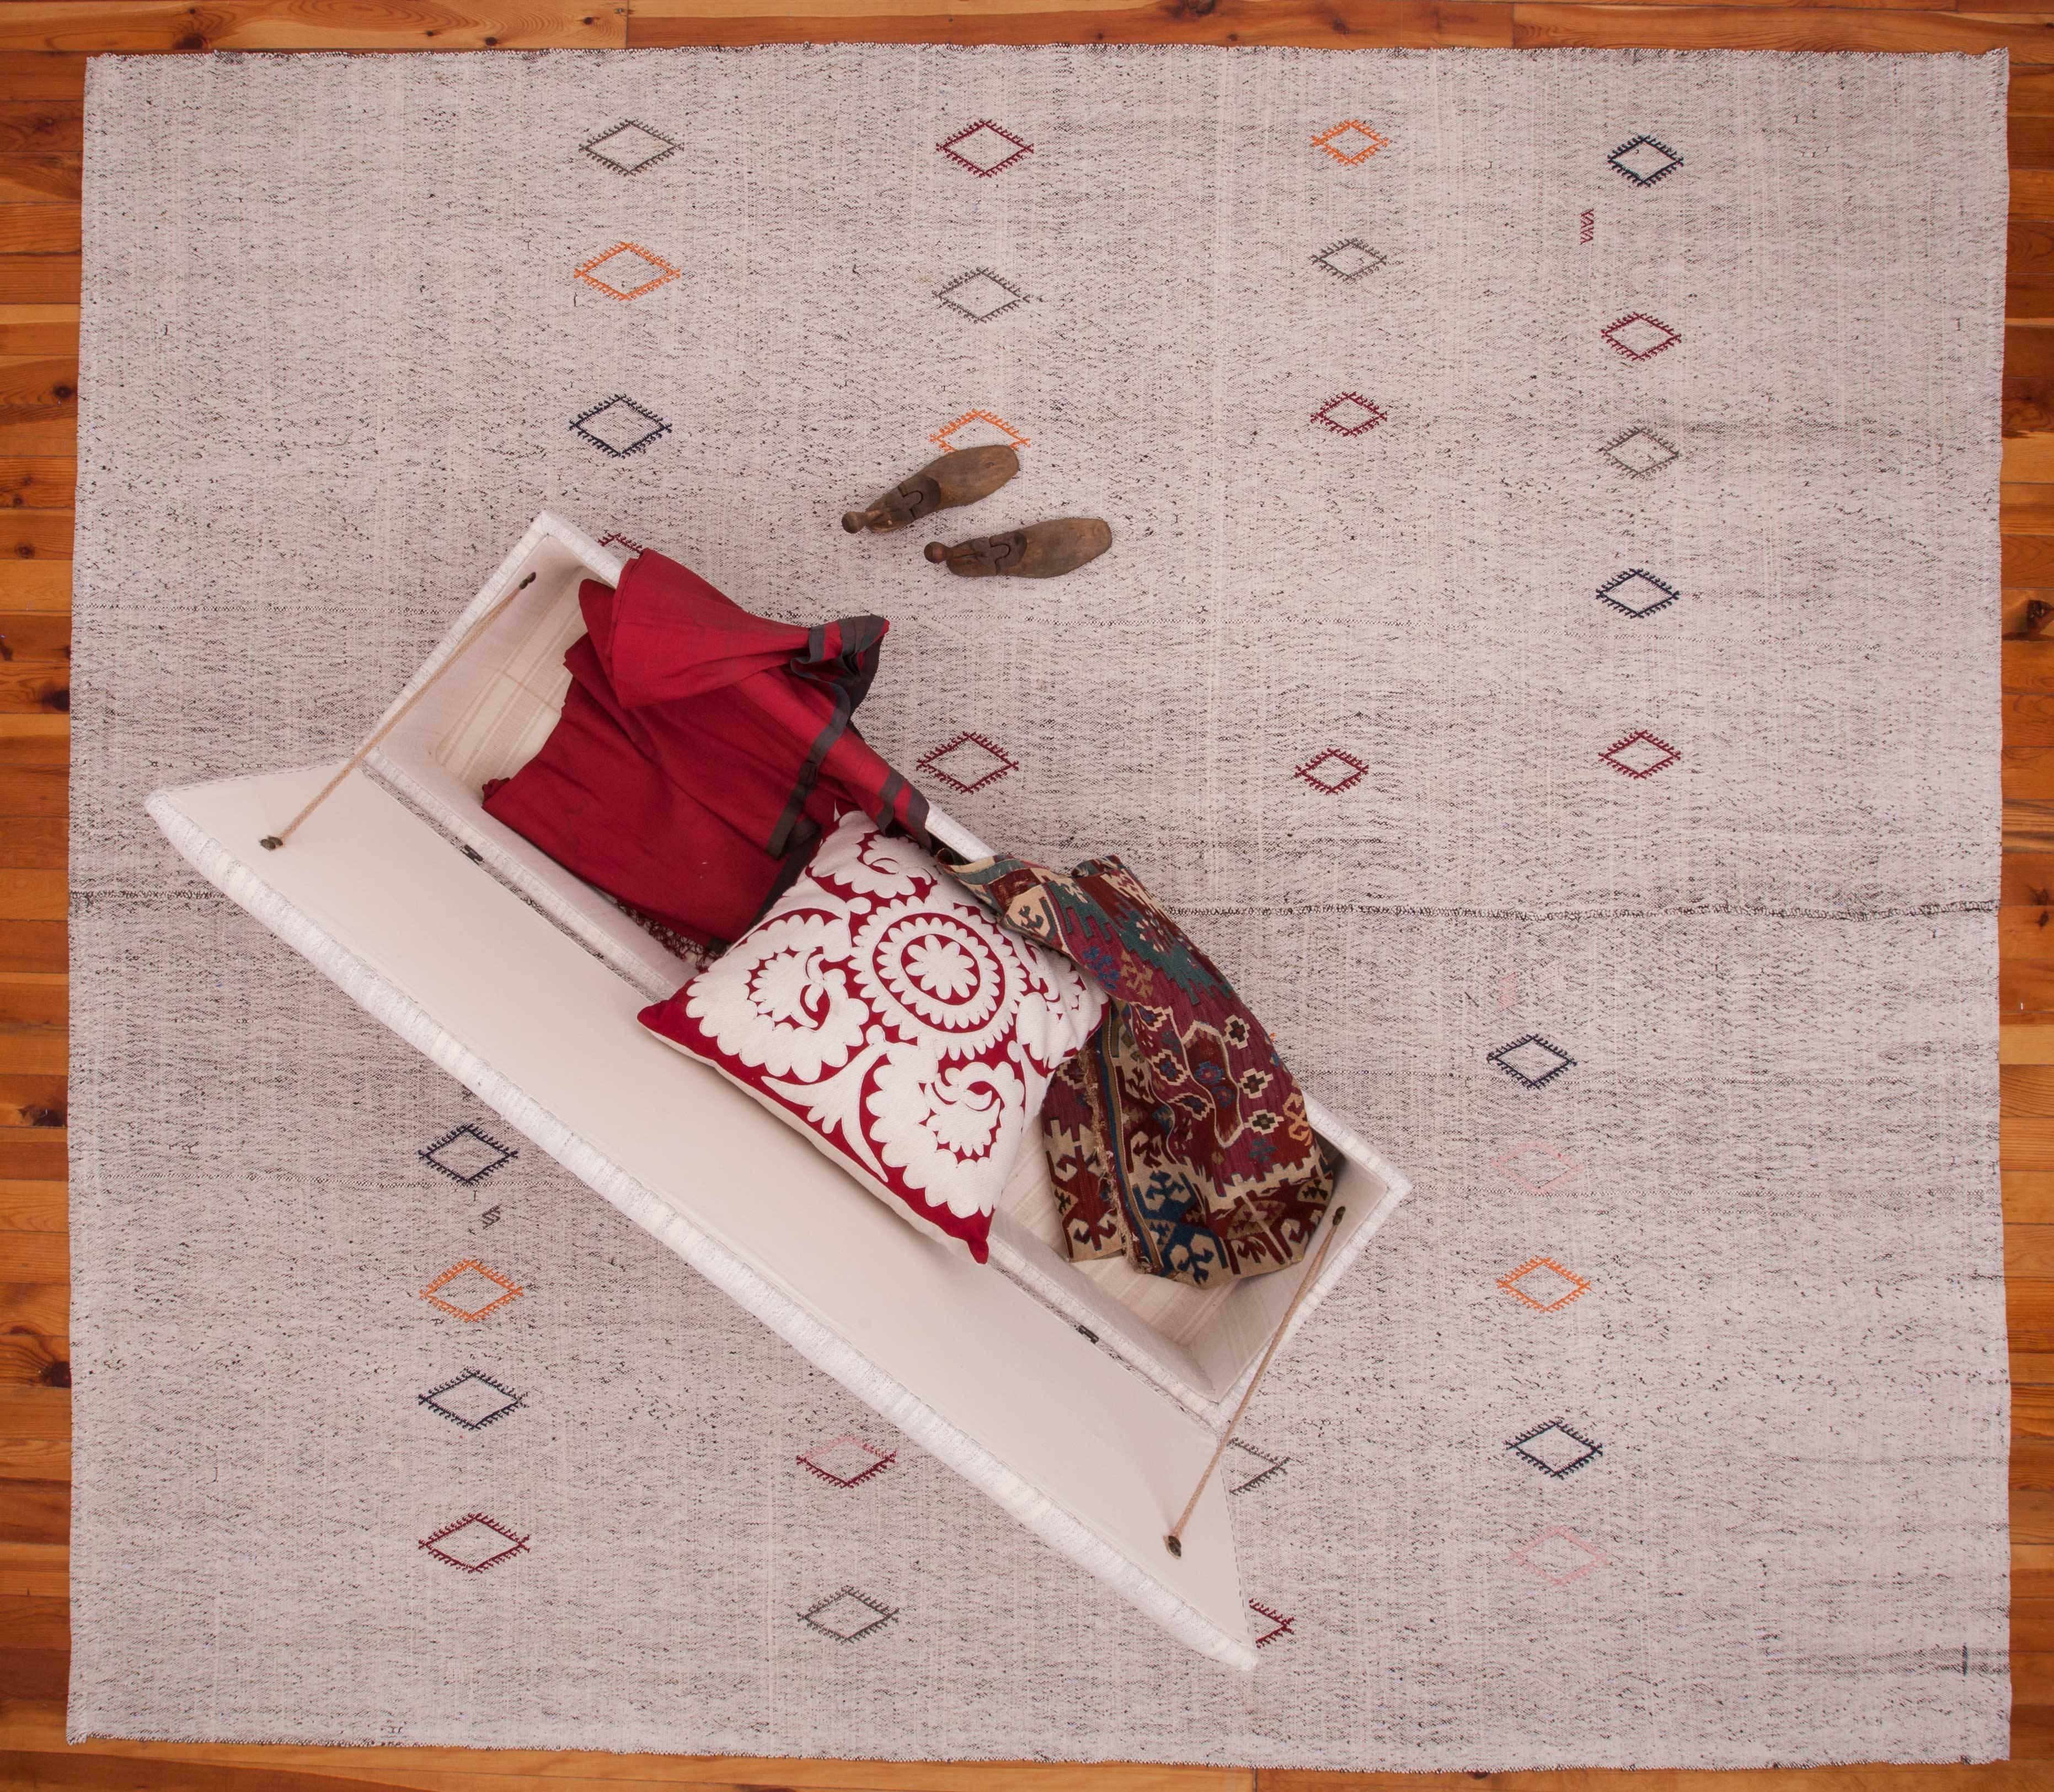 The warp threads on the kilim are from goat hair and the weft is cotton and the combination results in a salt and peppr look. Decoraded with embroidered jicims.